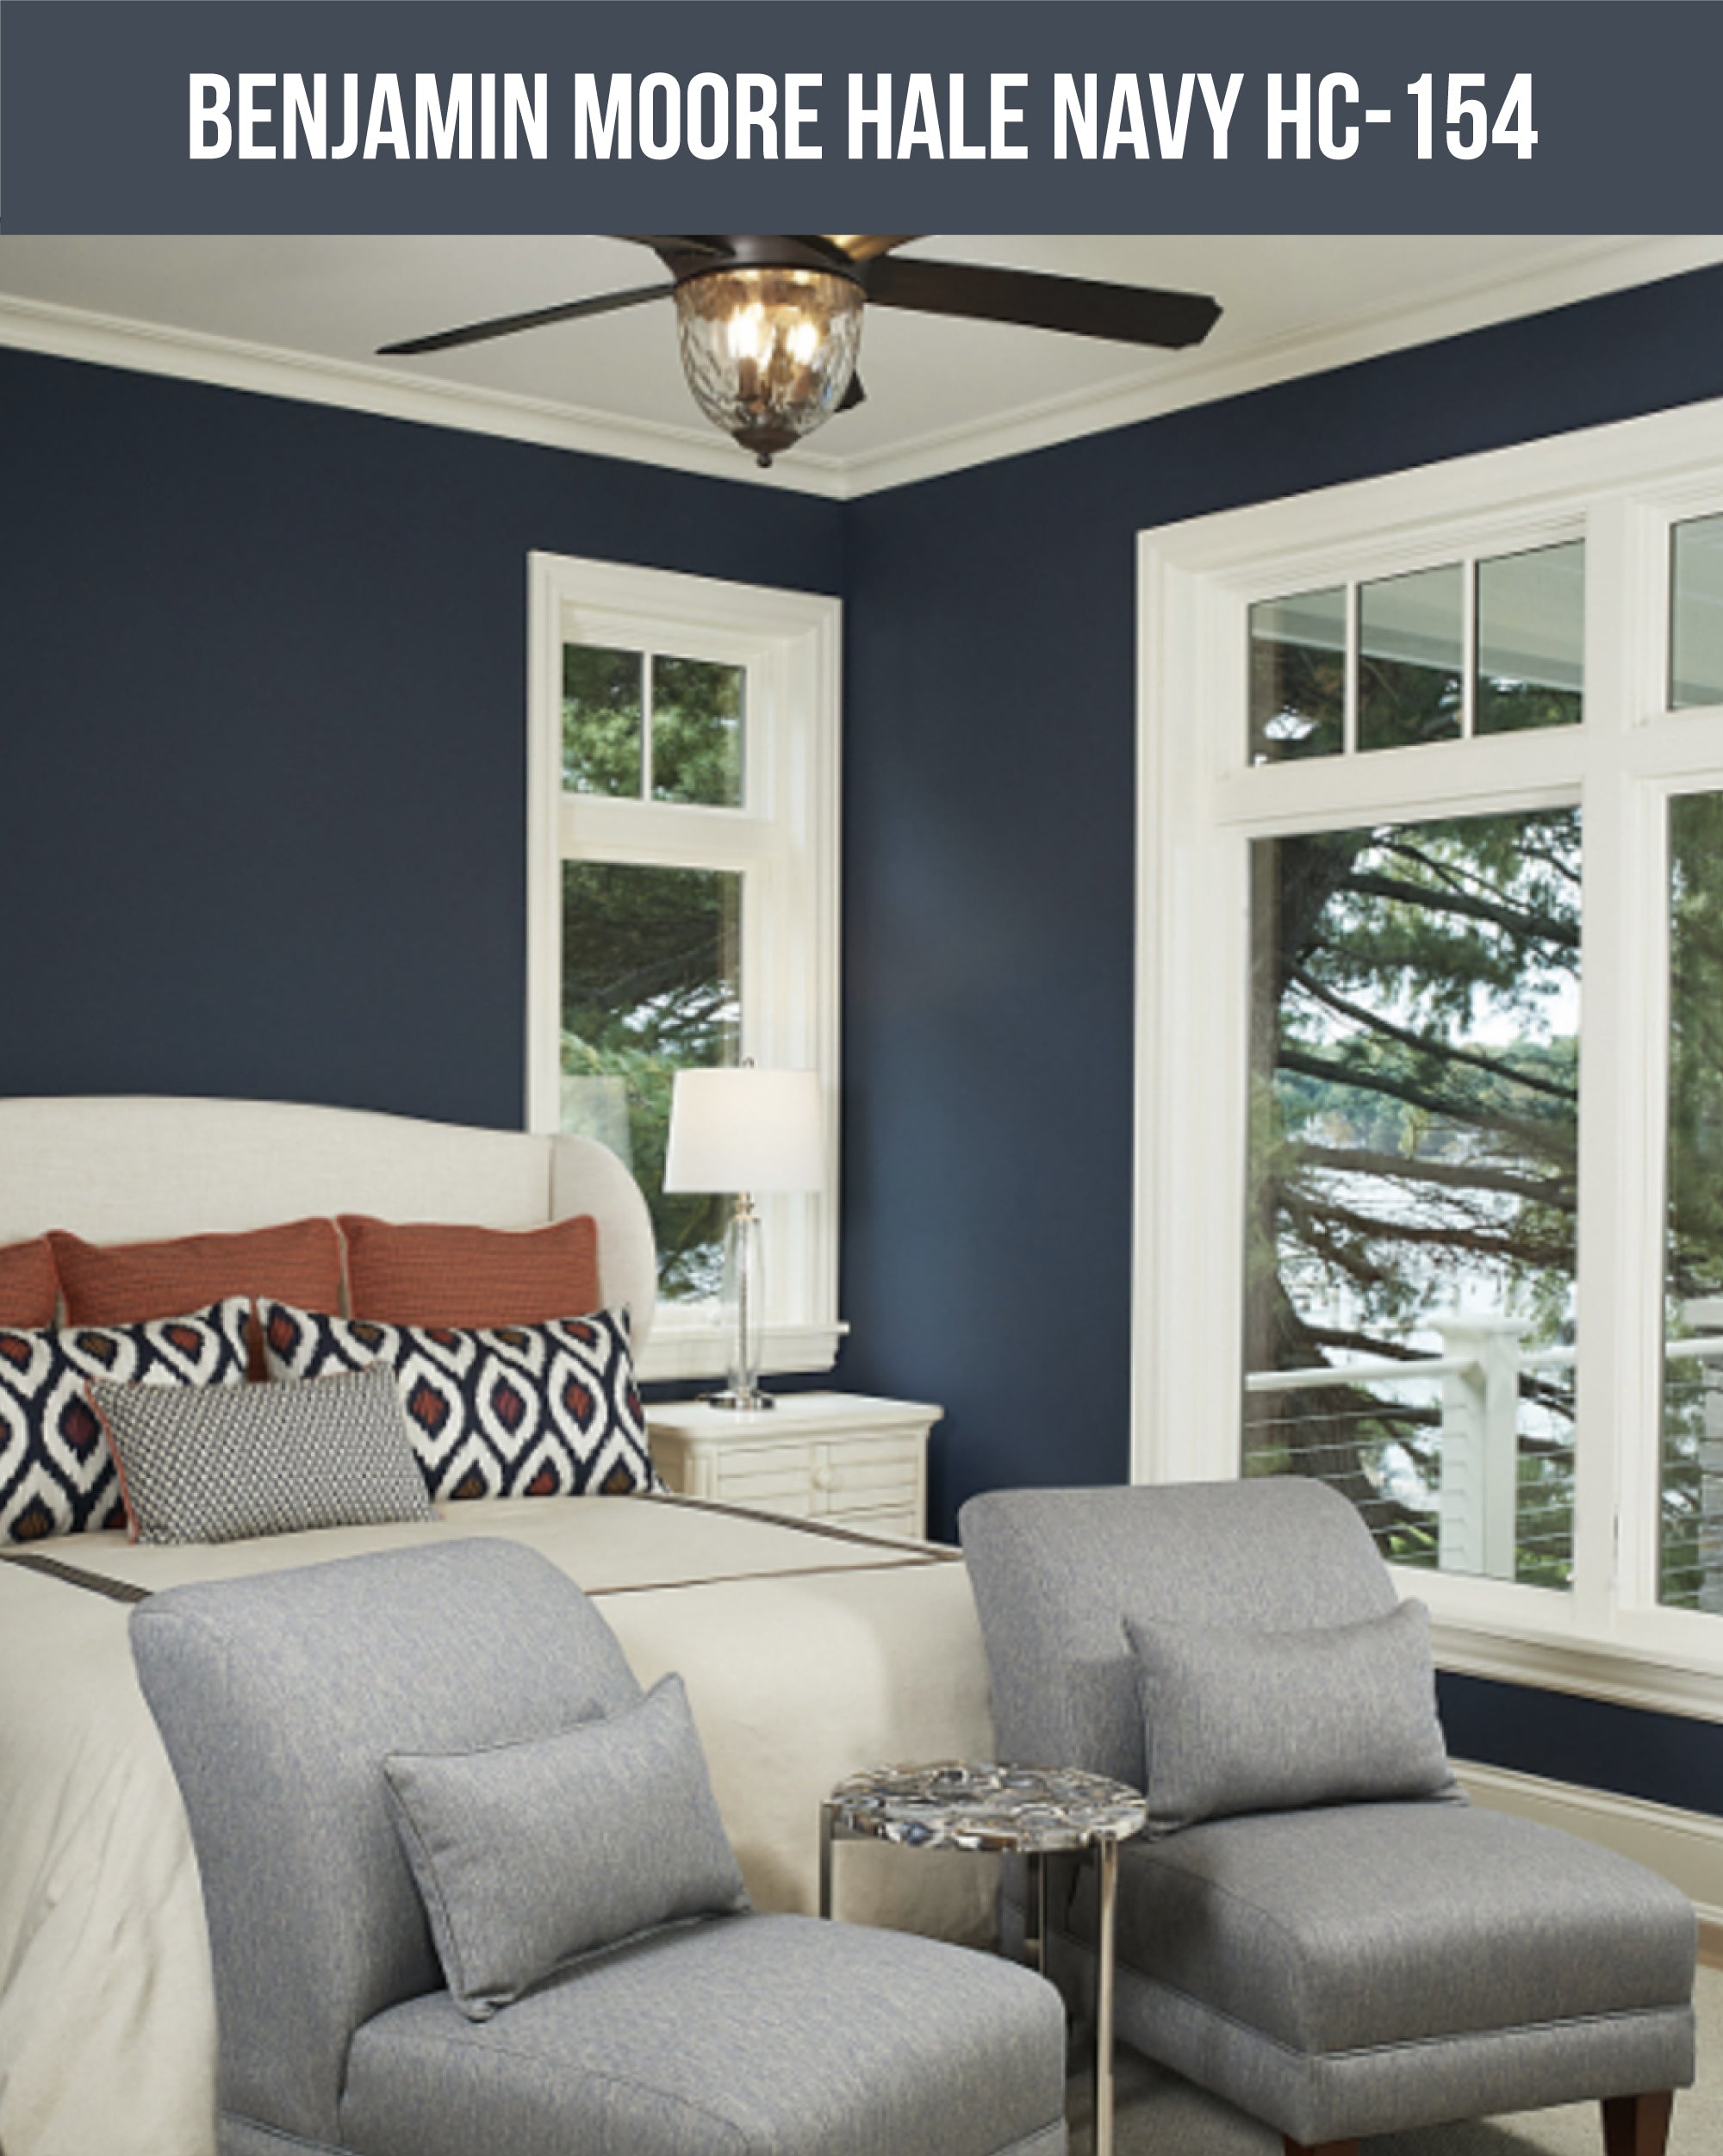 A blue painted bedroom with a bed and chairs (Benjamin Moore Hale Navy HC-154)